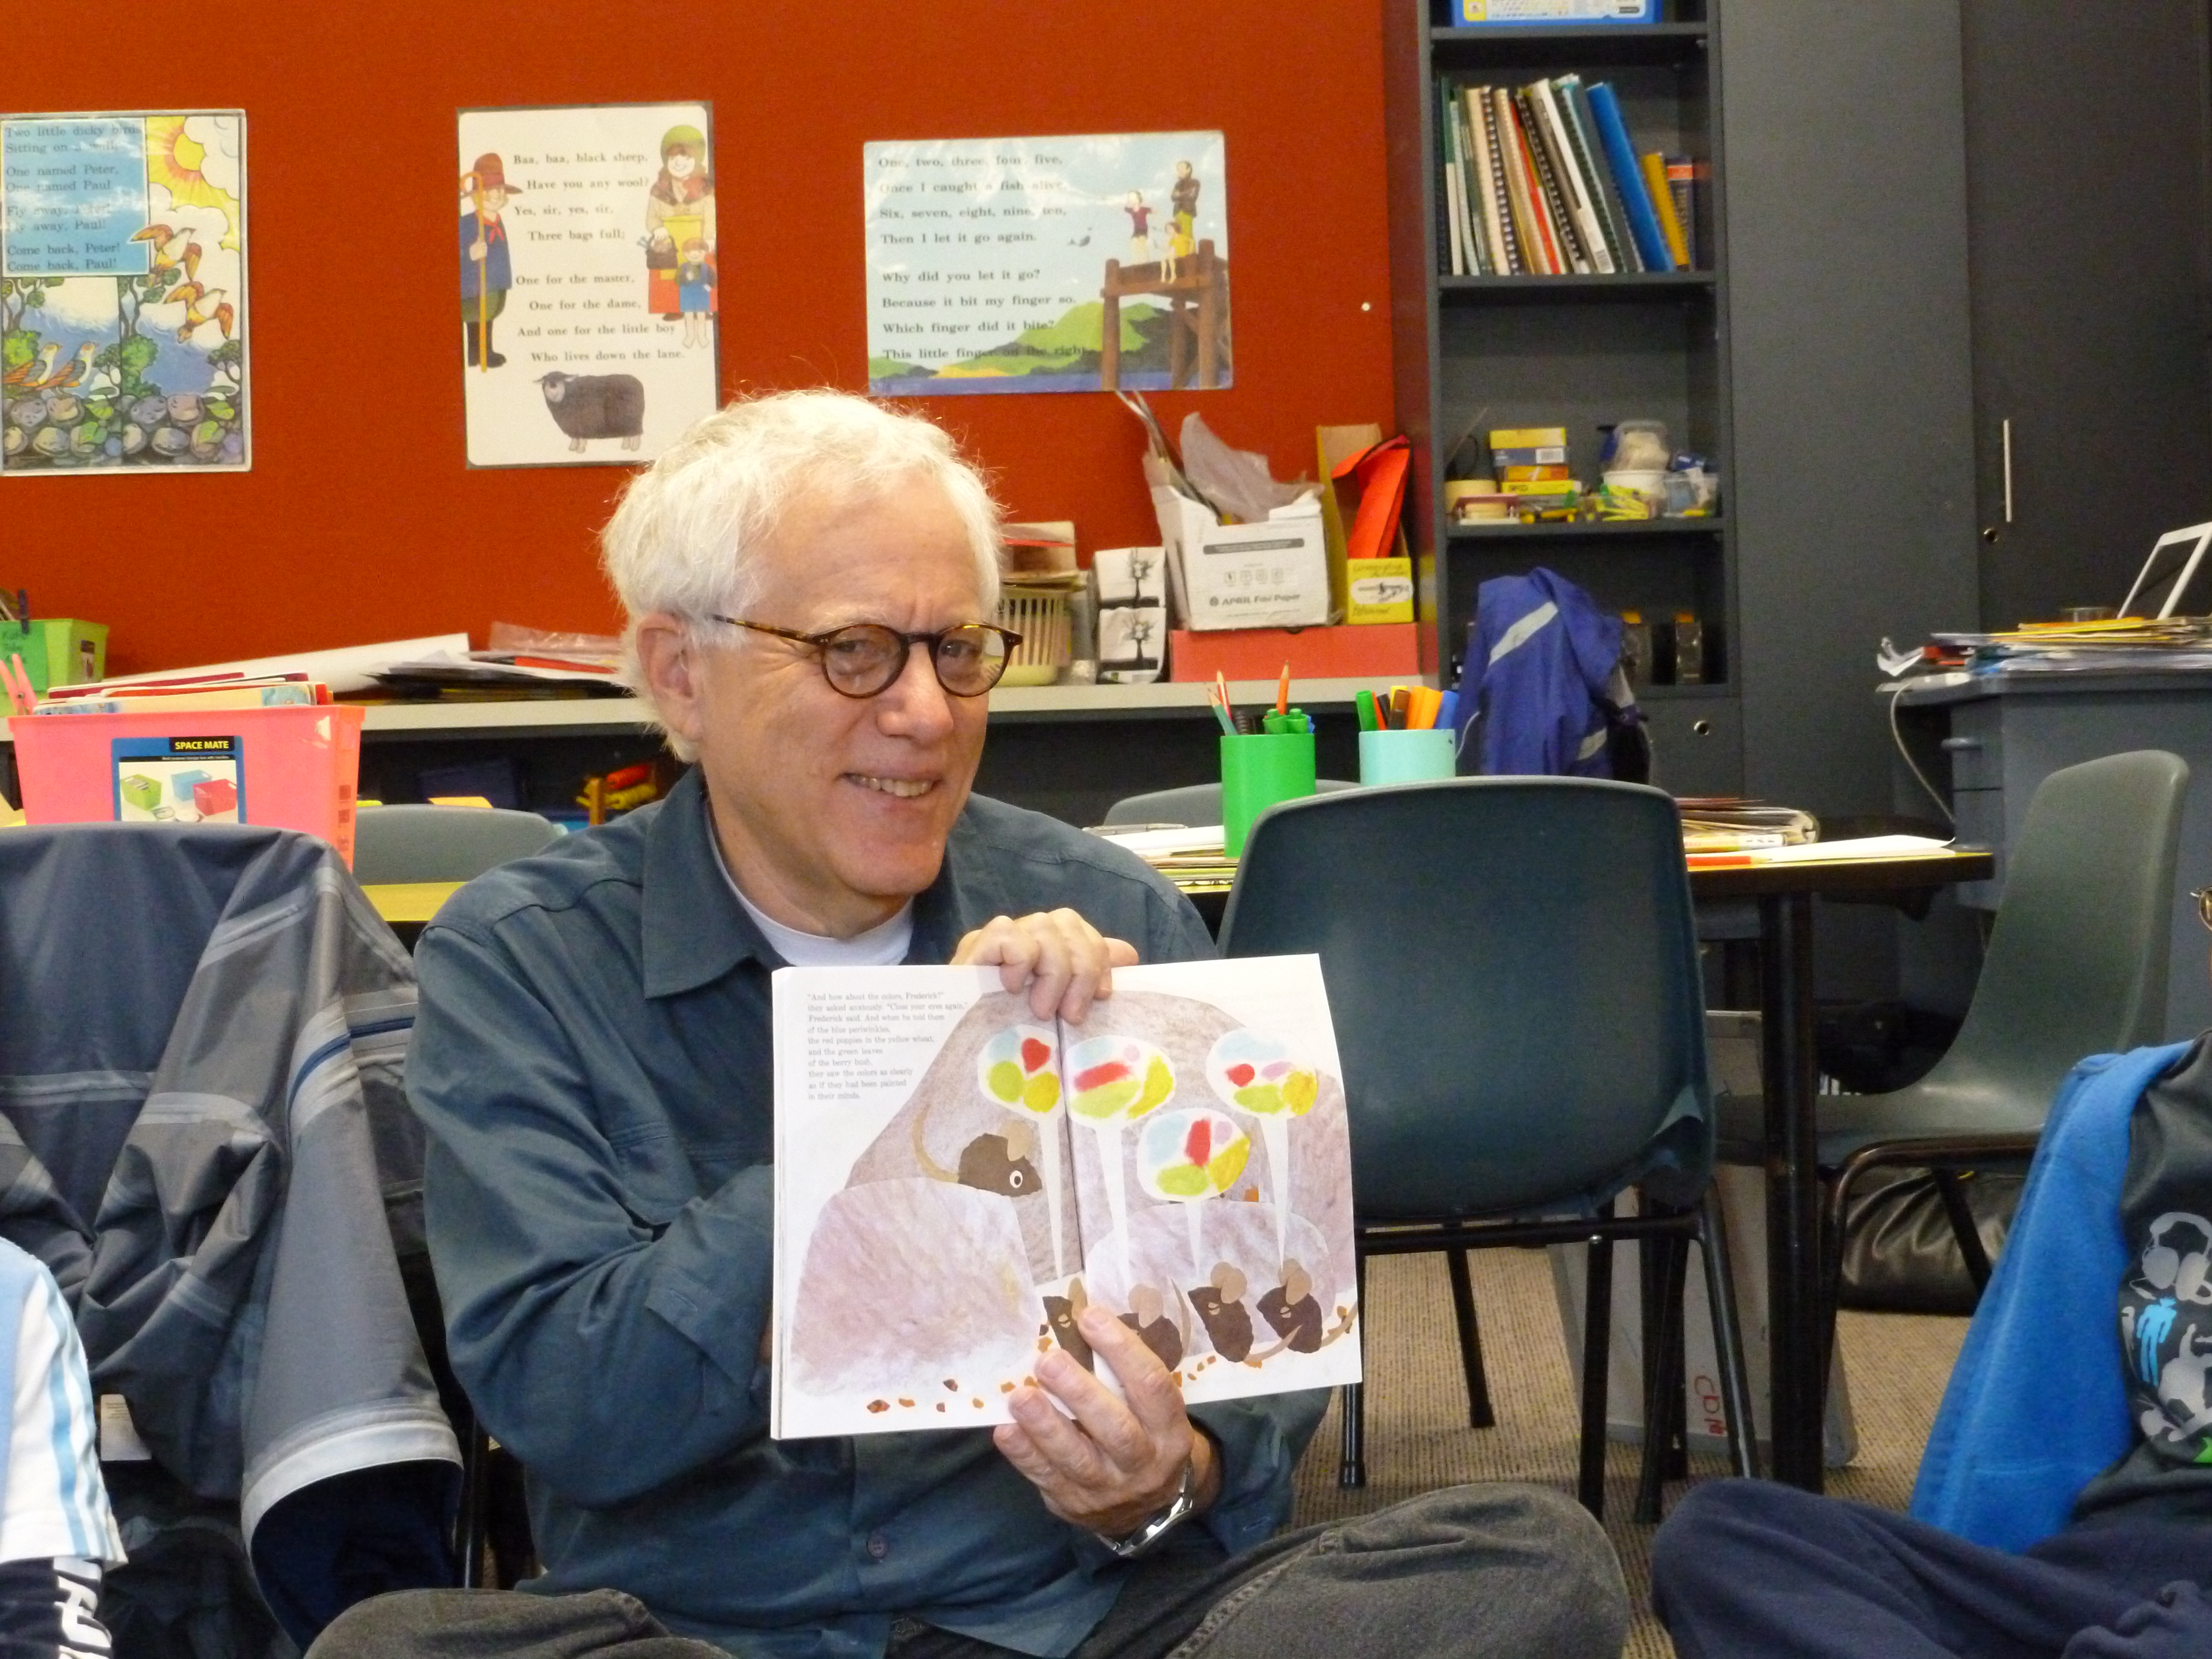 A white-haired man with dark glasses smiles as he holds open a children's picture book in a classroom setting.